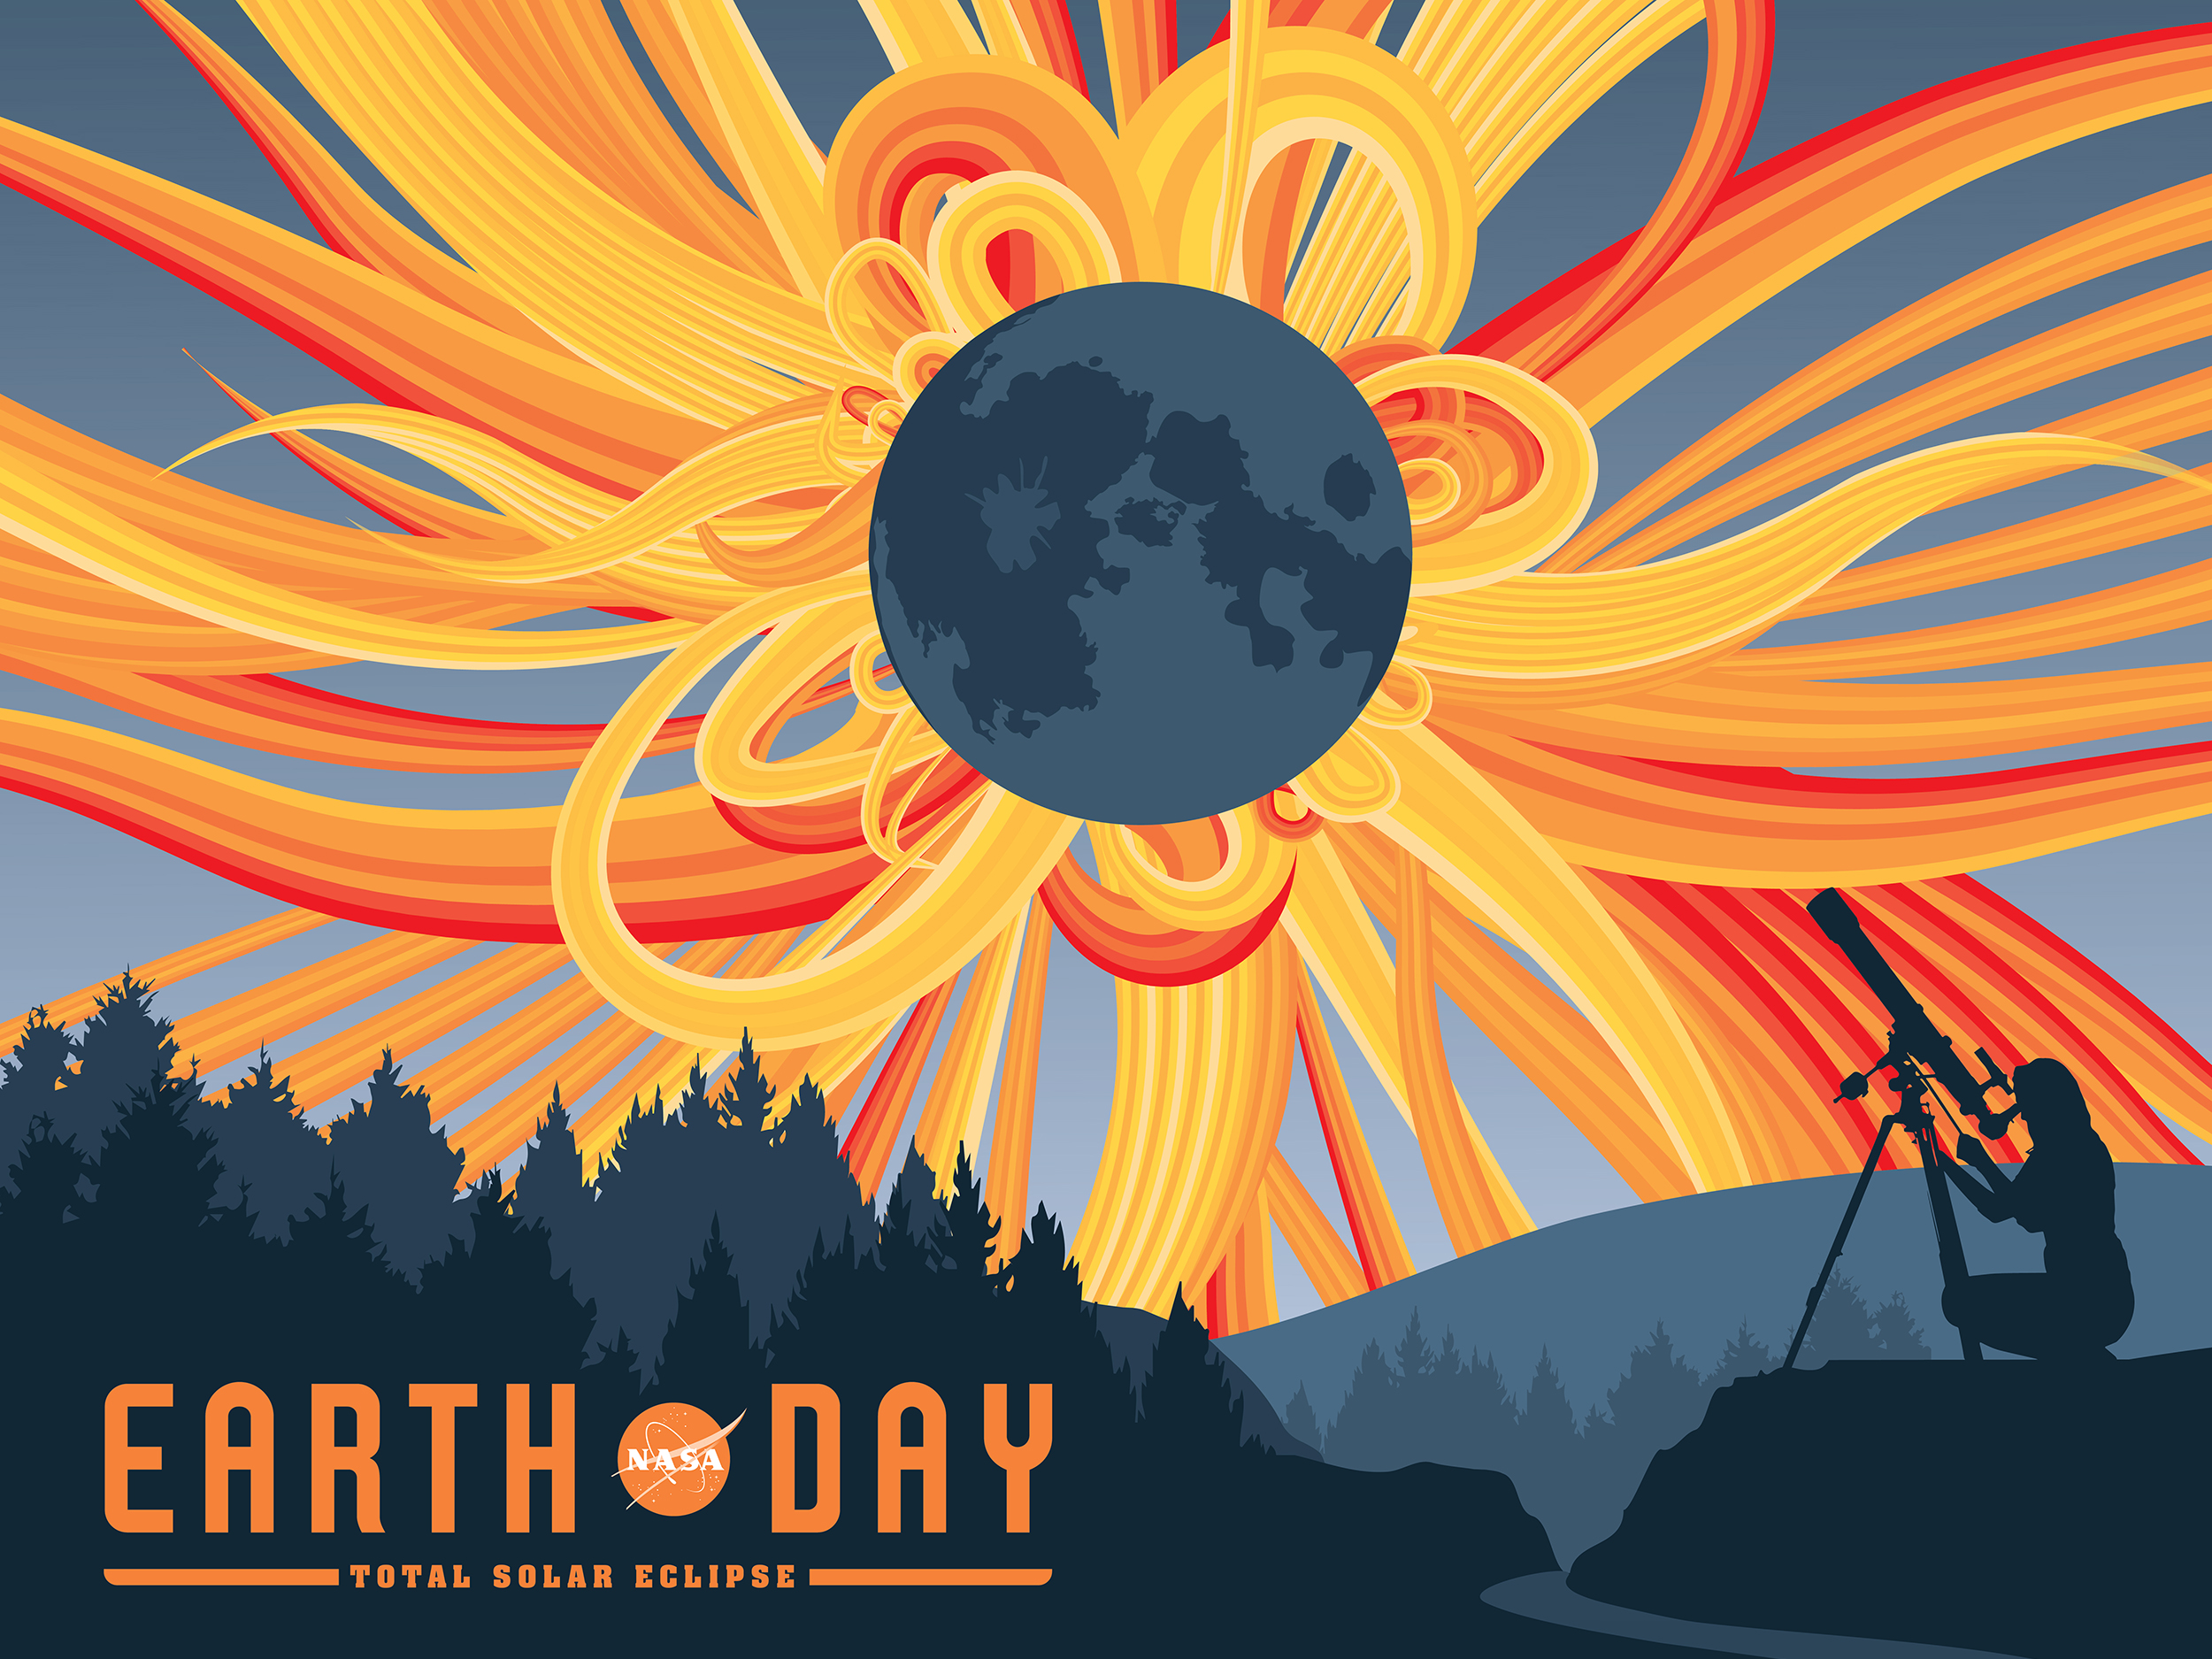 Earth Day 2017 poster